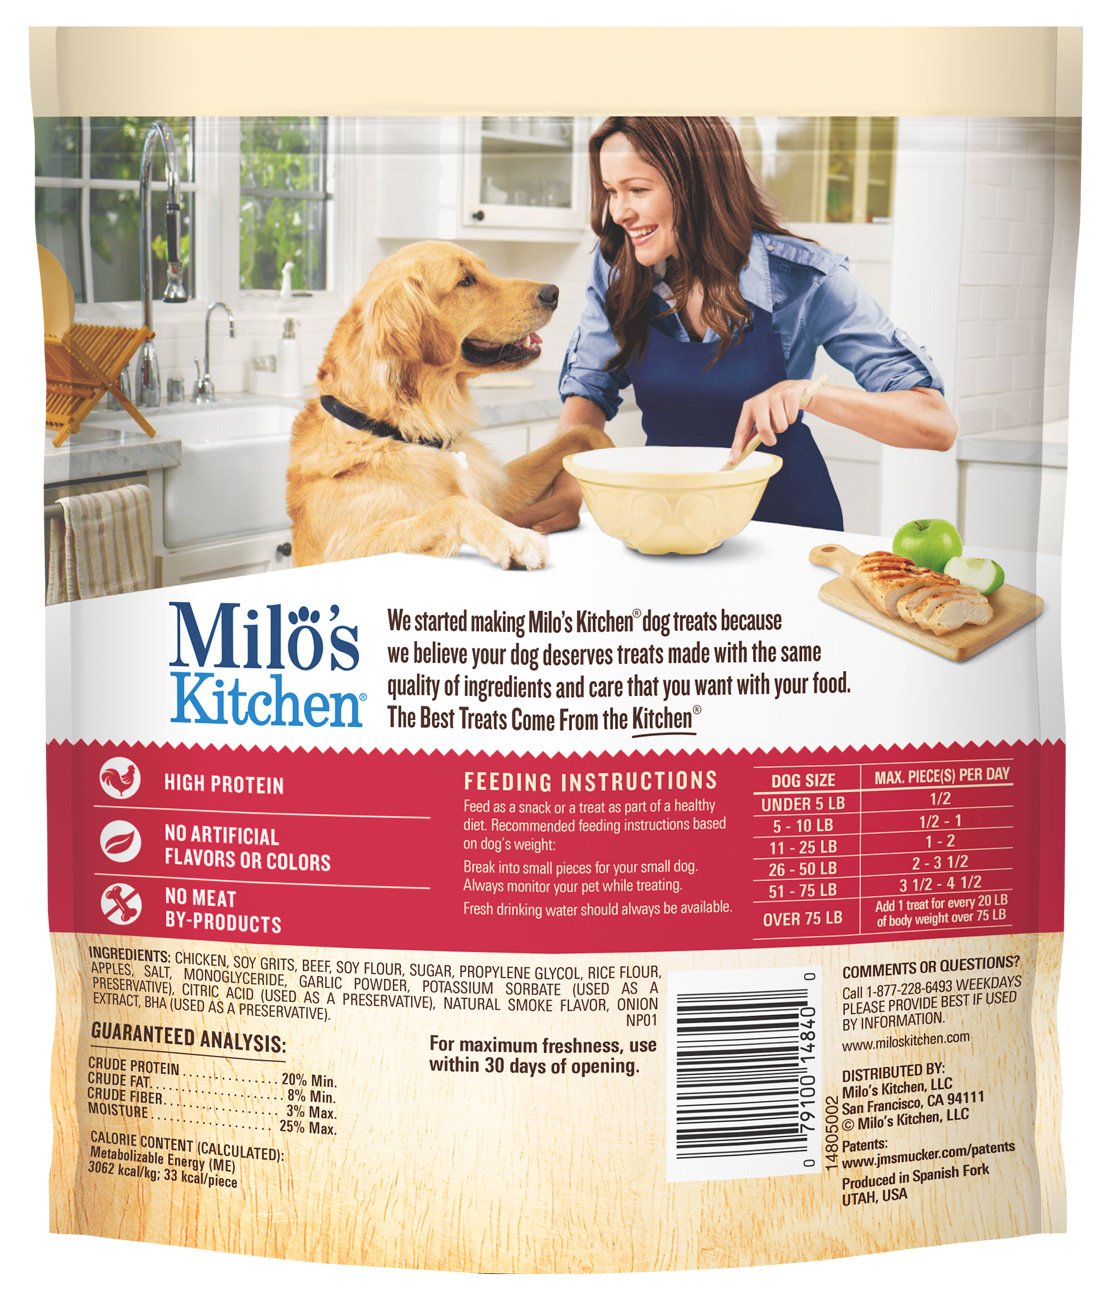 Milo's Kitchen Chicken Apple and Sausage Slices Dehydrated Dog Treats - 18 Oz - Case of 4  